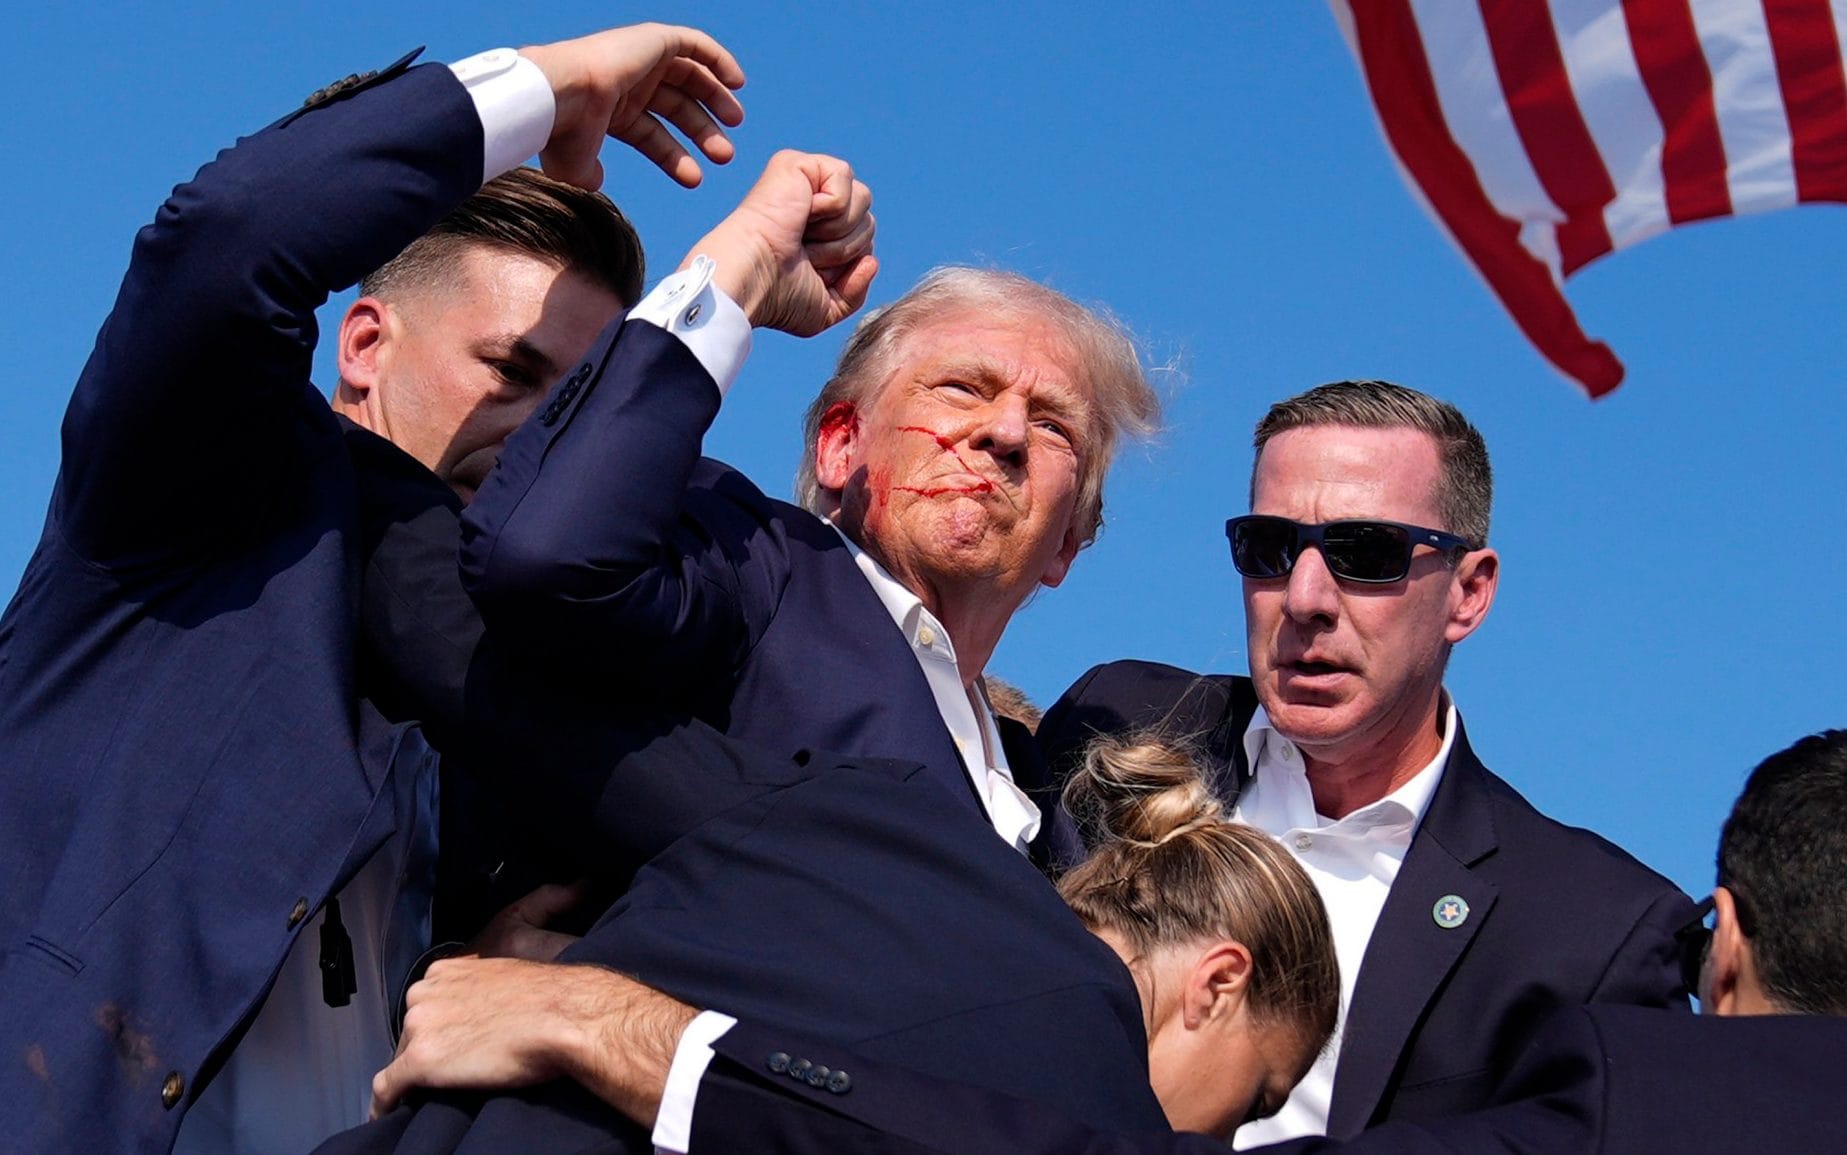 Bloodied Donald Trump carried from stage after deadly shooting at rally